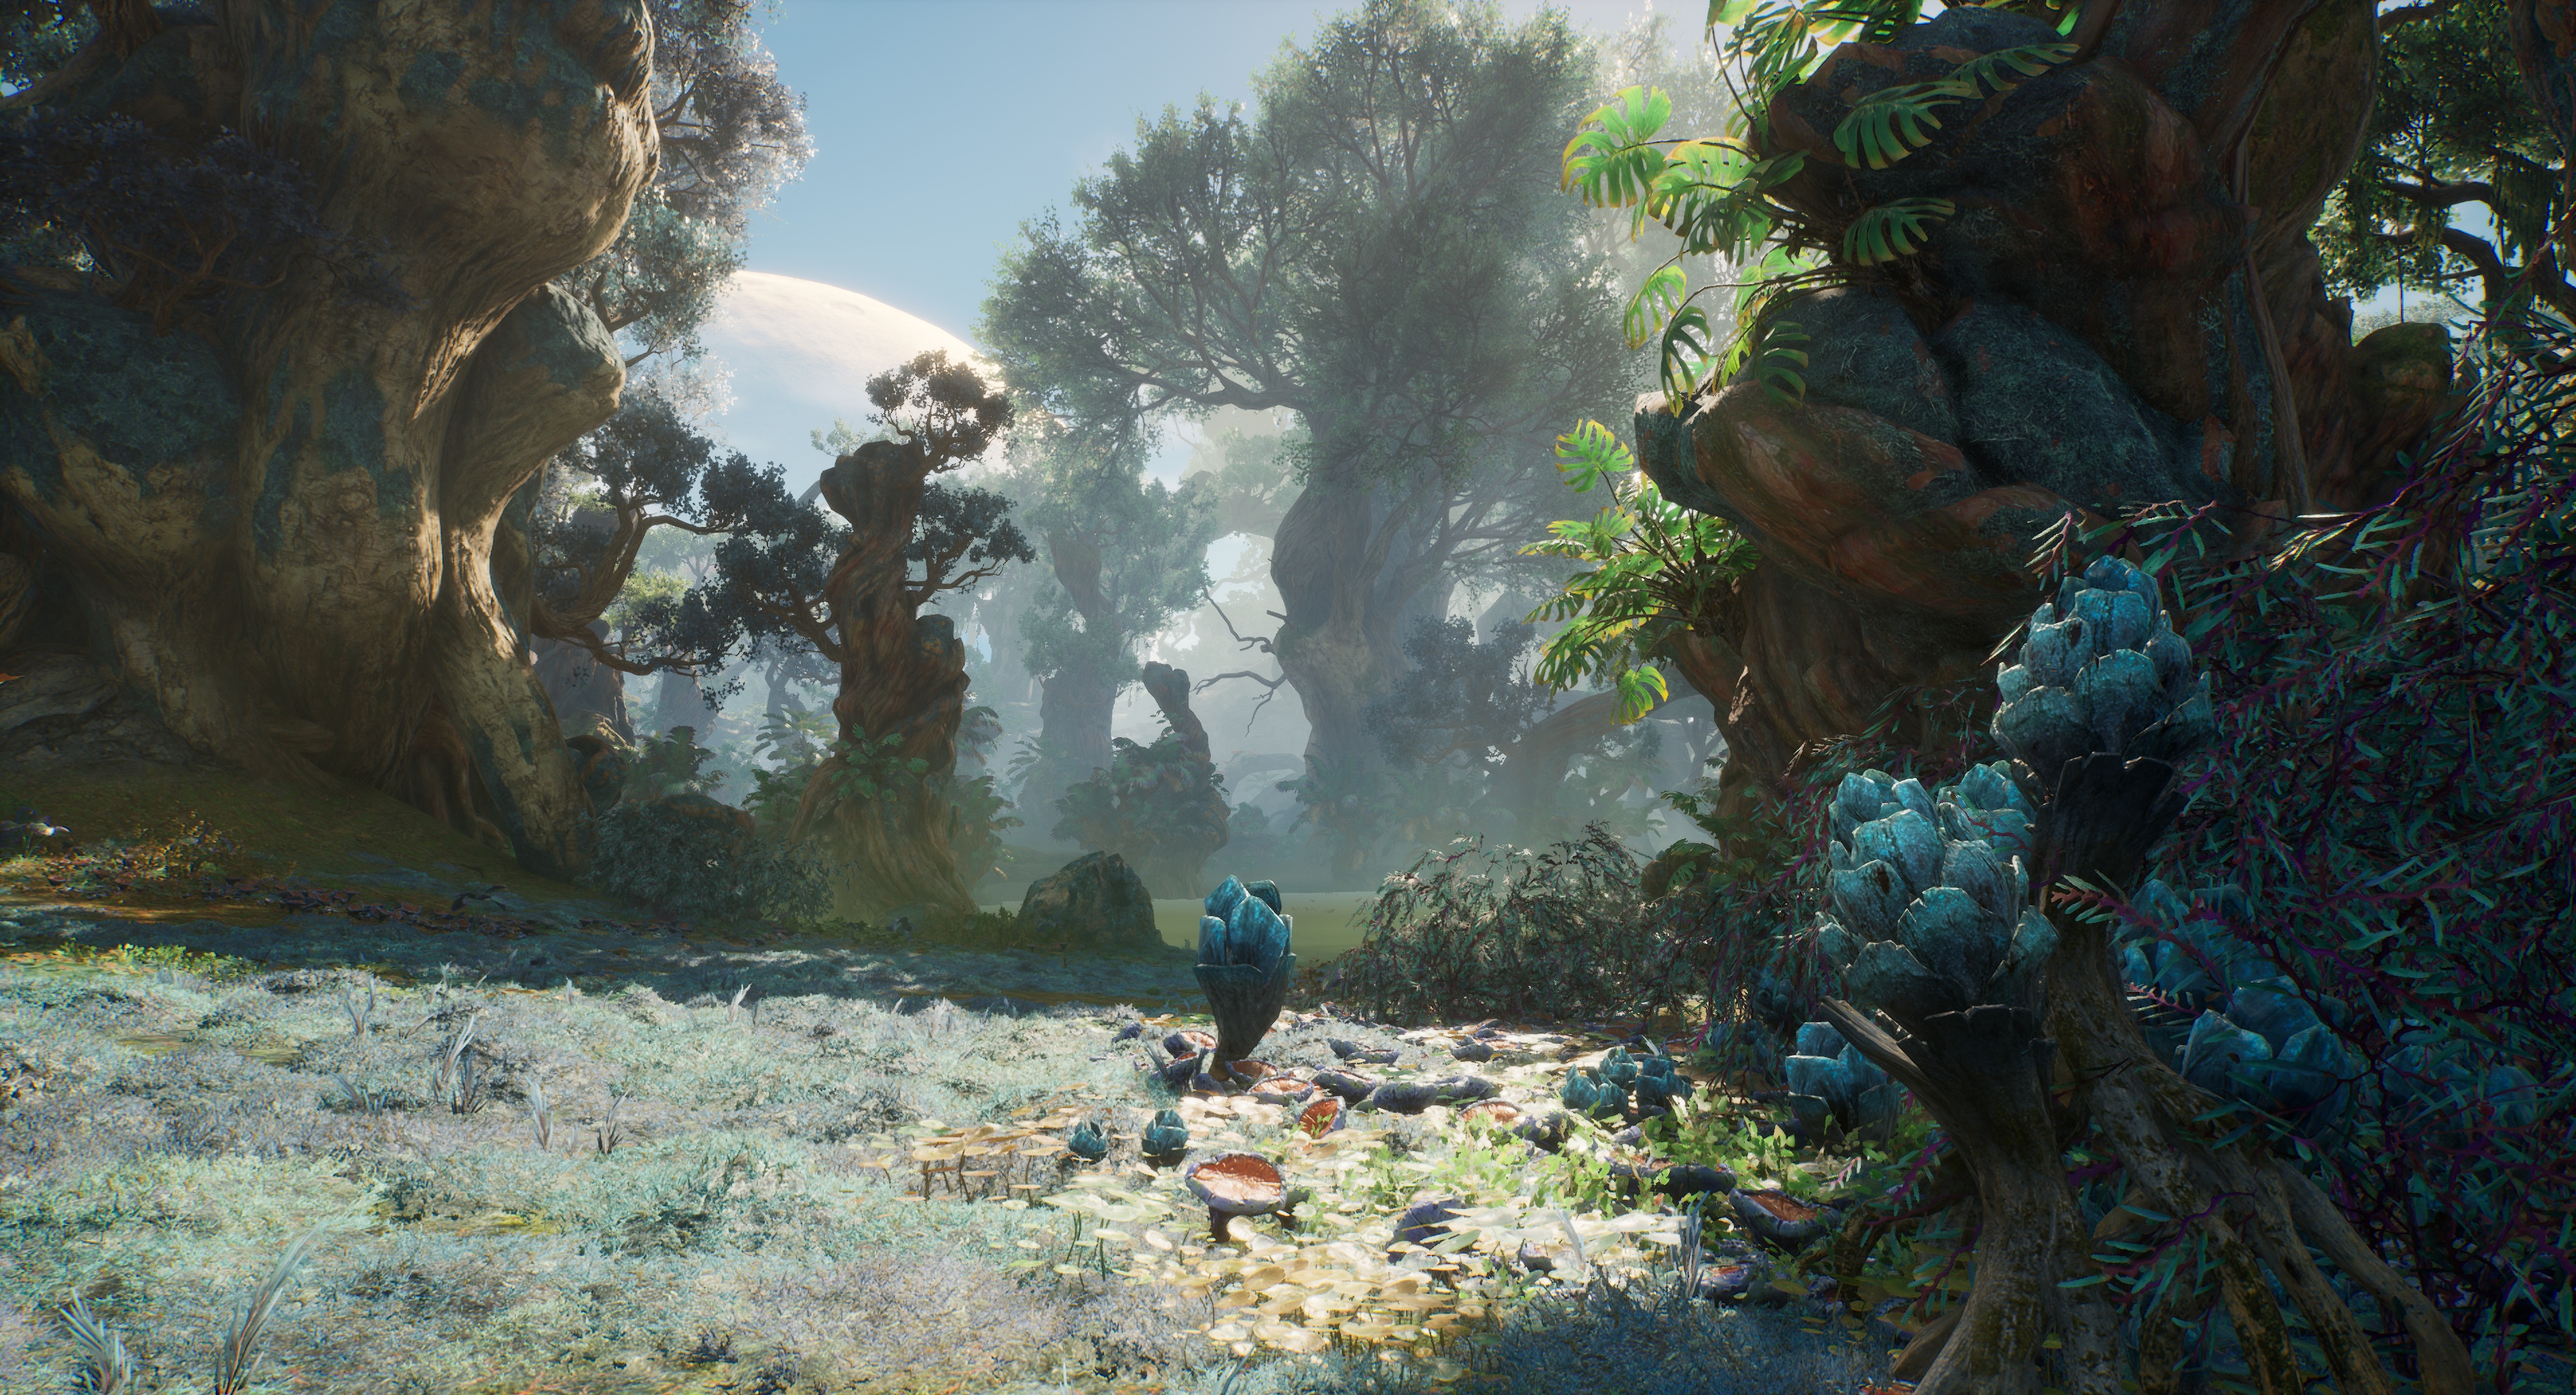 (The game begins in a forest region that is somewhat reminiscent of James Cameron's Avatar.)